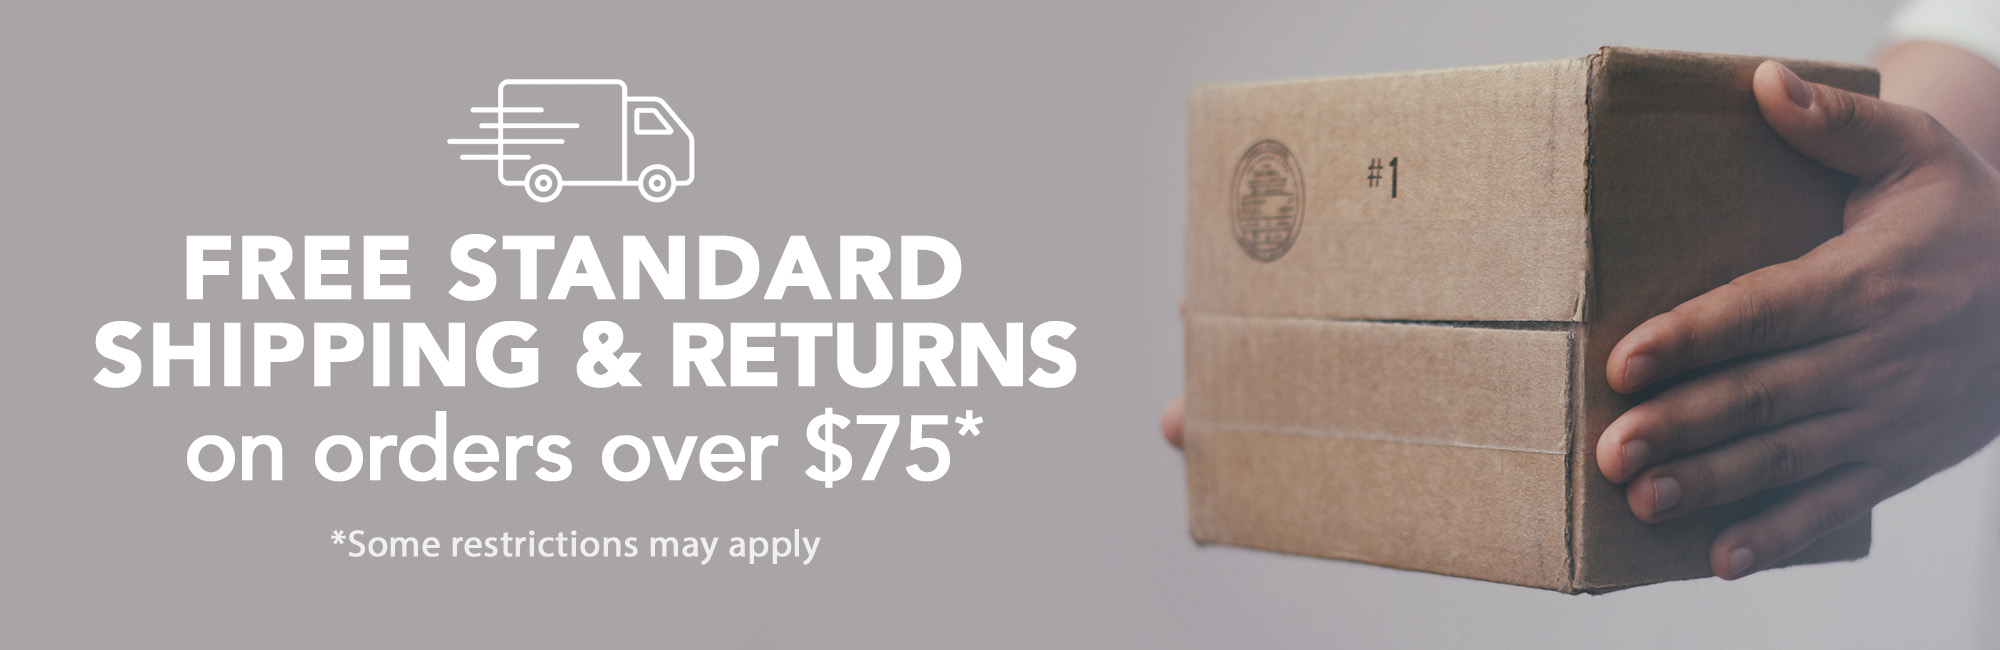 Free Standard Shipping and Returns on Orders Over $75!